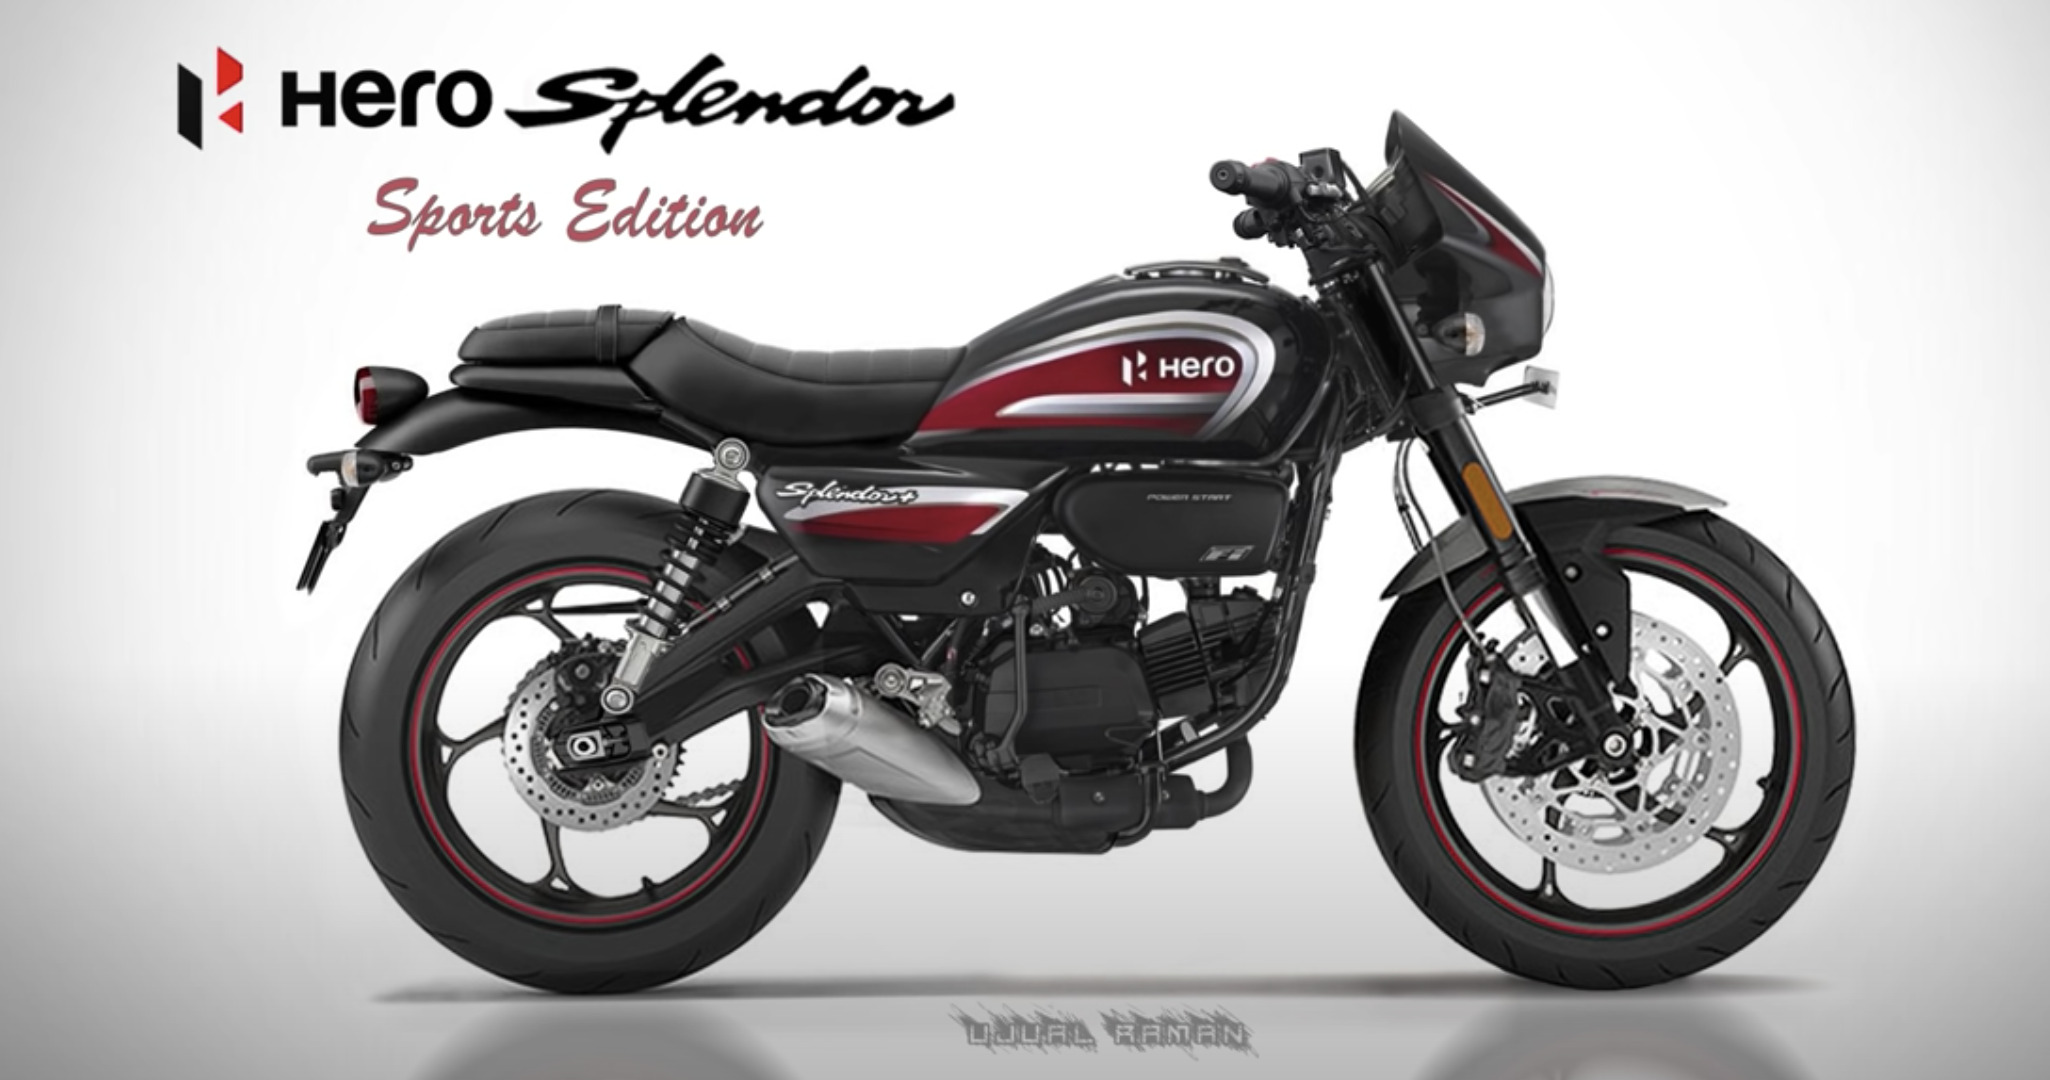 Meet Hero Splendor Sports Edition - Features USD Front Forks!